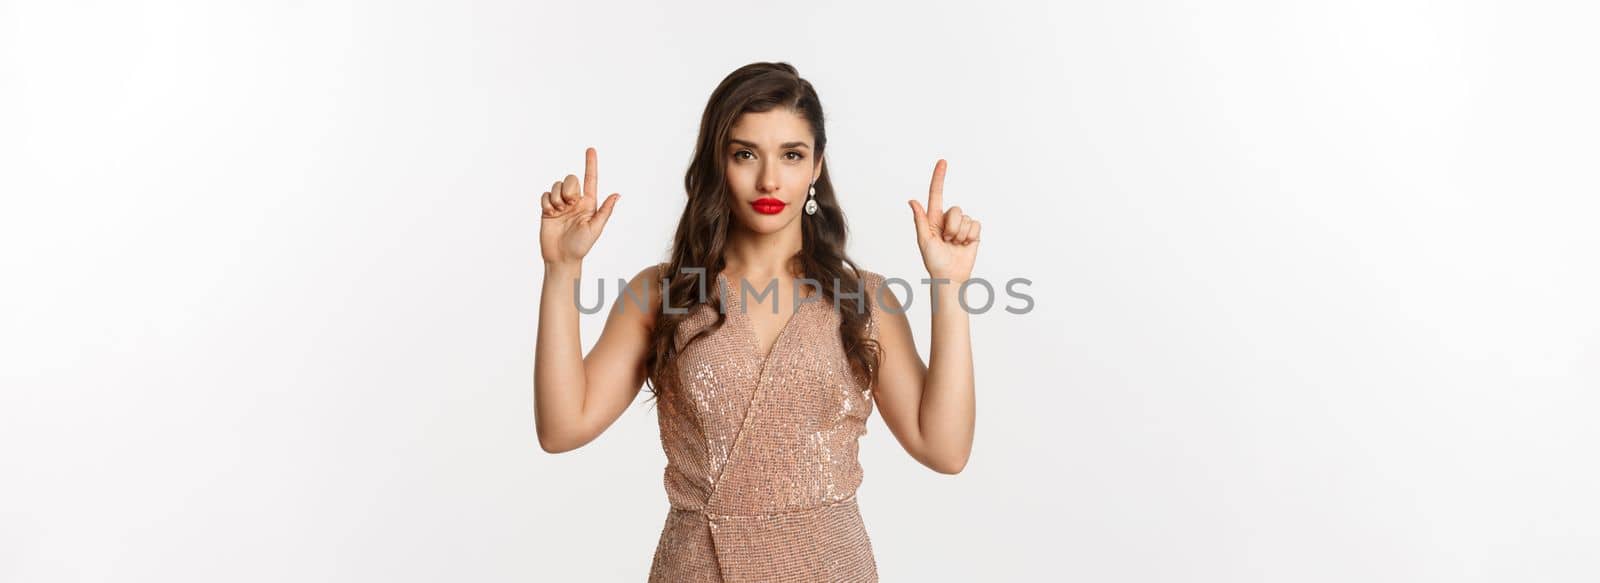 New Year, christmas and celebration concept. Elegant young woman with red lipstick, wearing party dress and looking sassy, pointing fingers up at logo, white background.